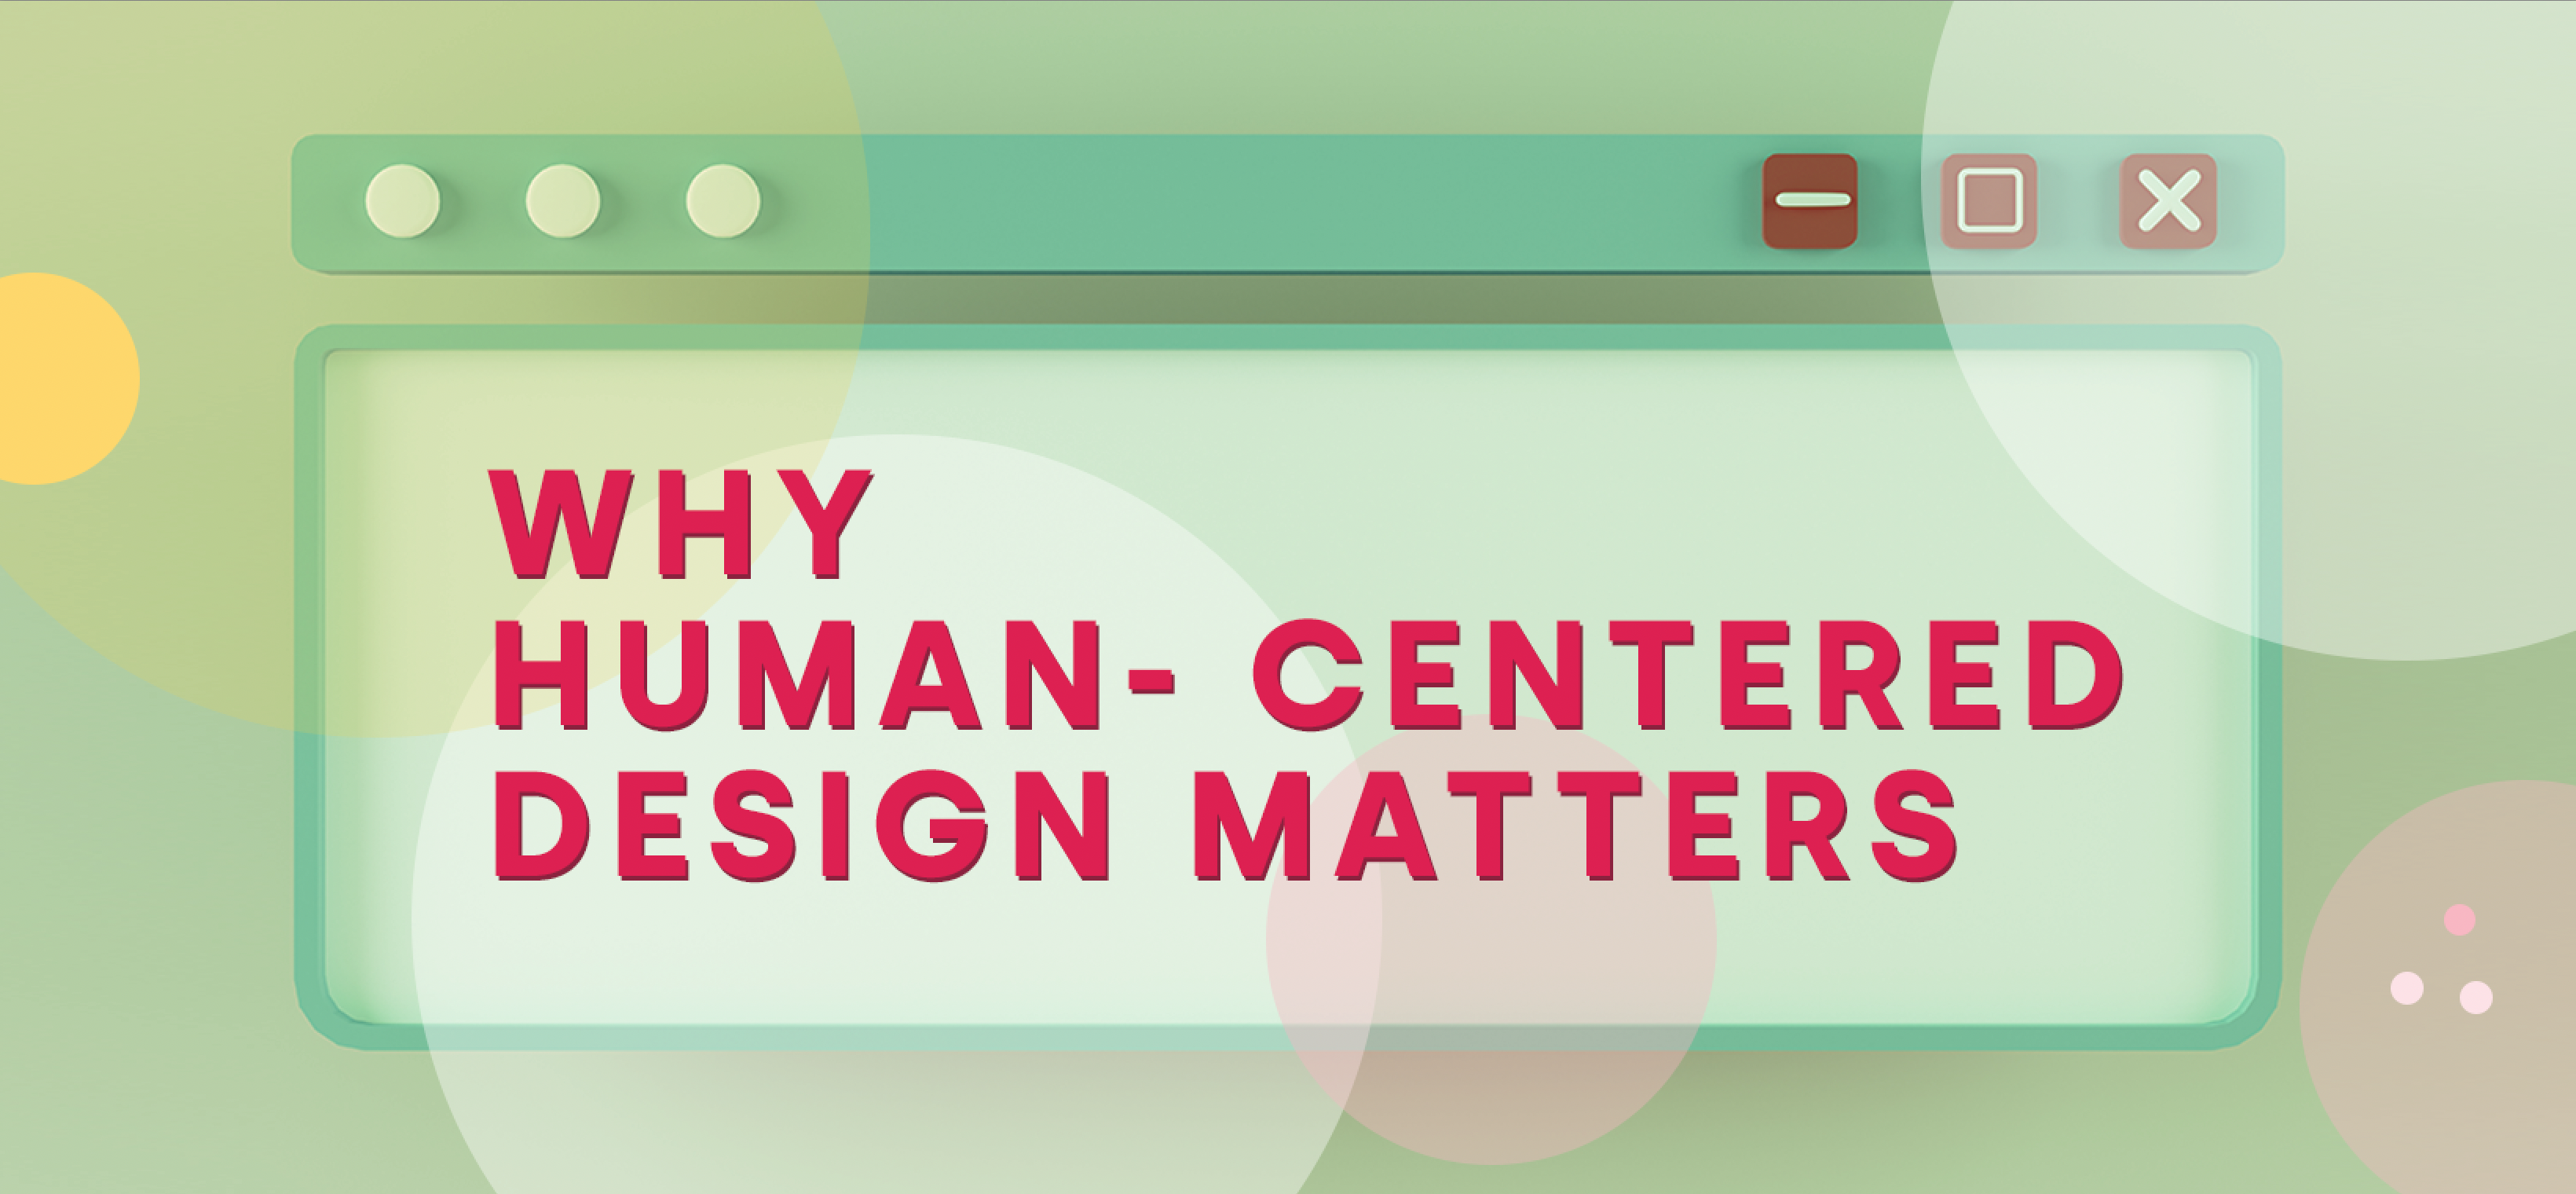 Why human-centered design matters